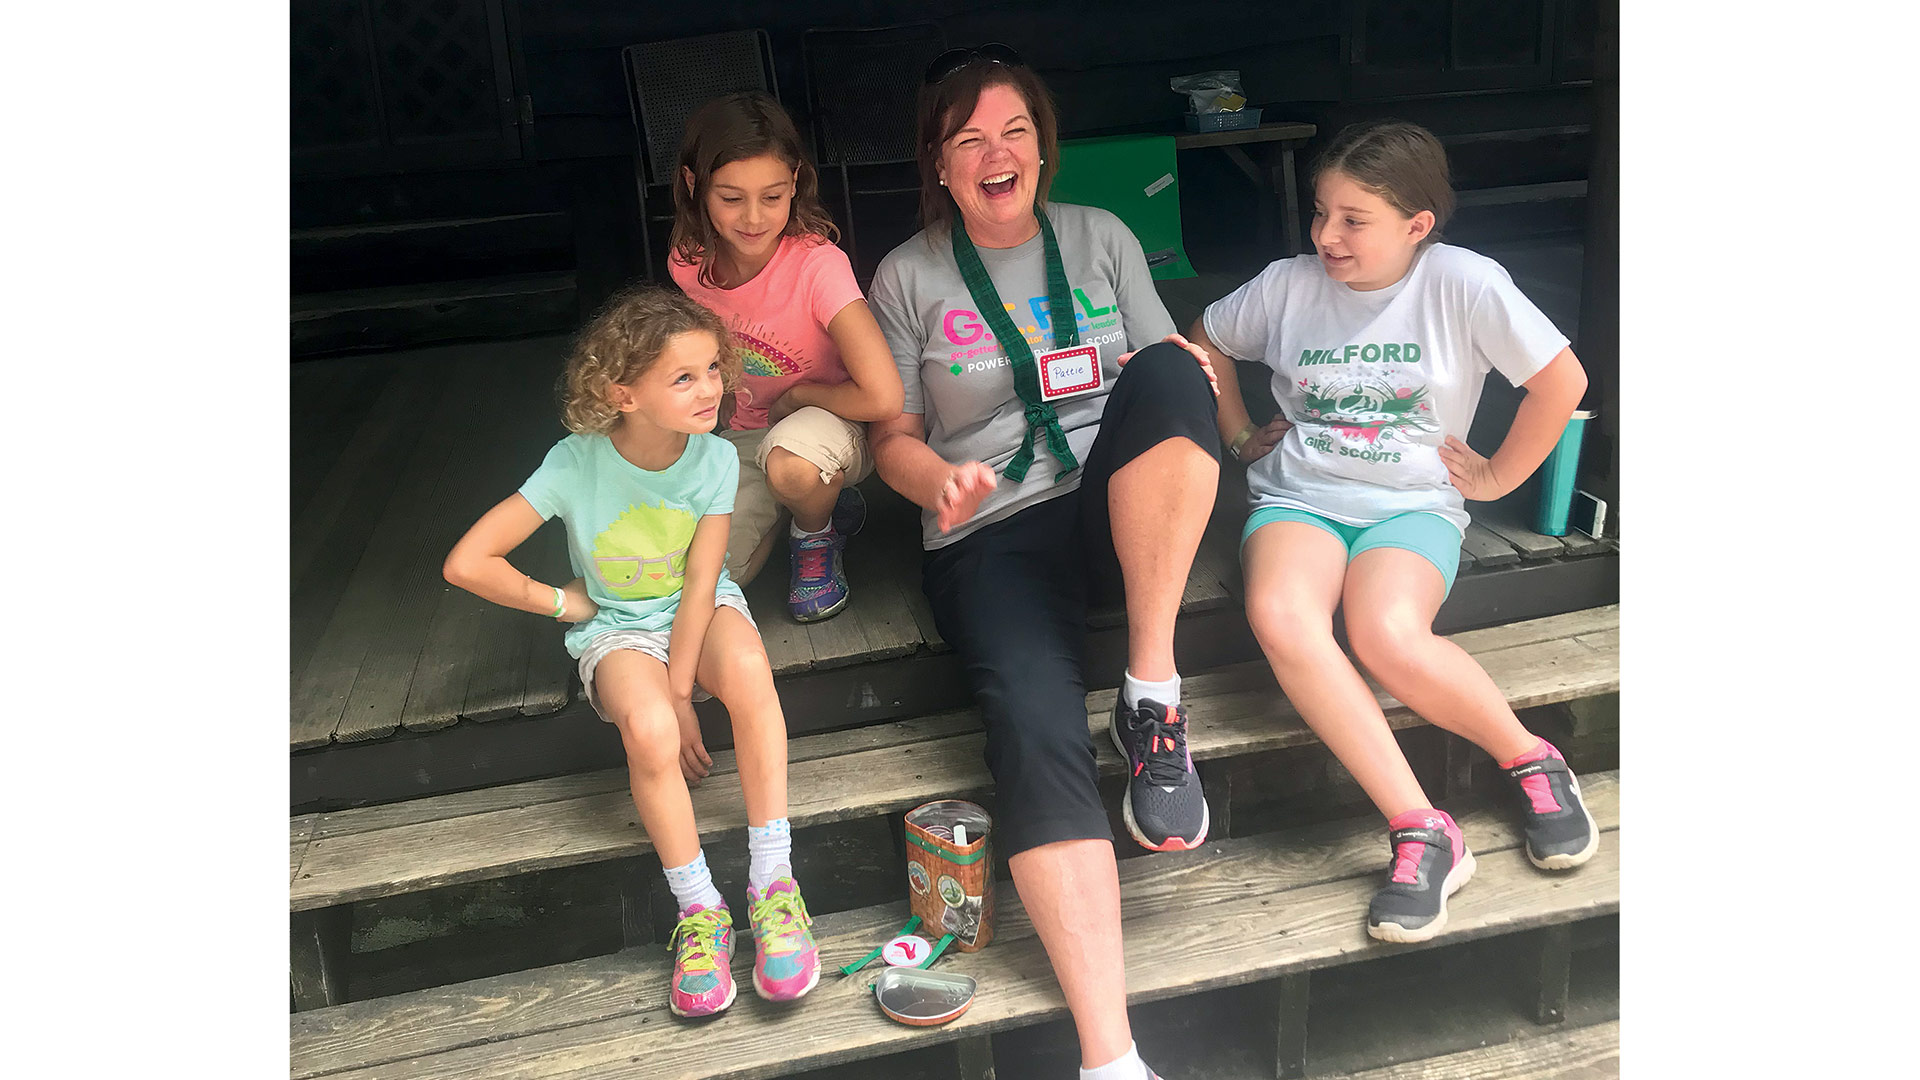 Pattie Hallberg says she enjoys spending time with Girl Scouts, and those who have been Scouts and can talk about what that organization has done for them.